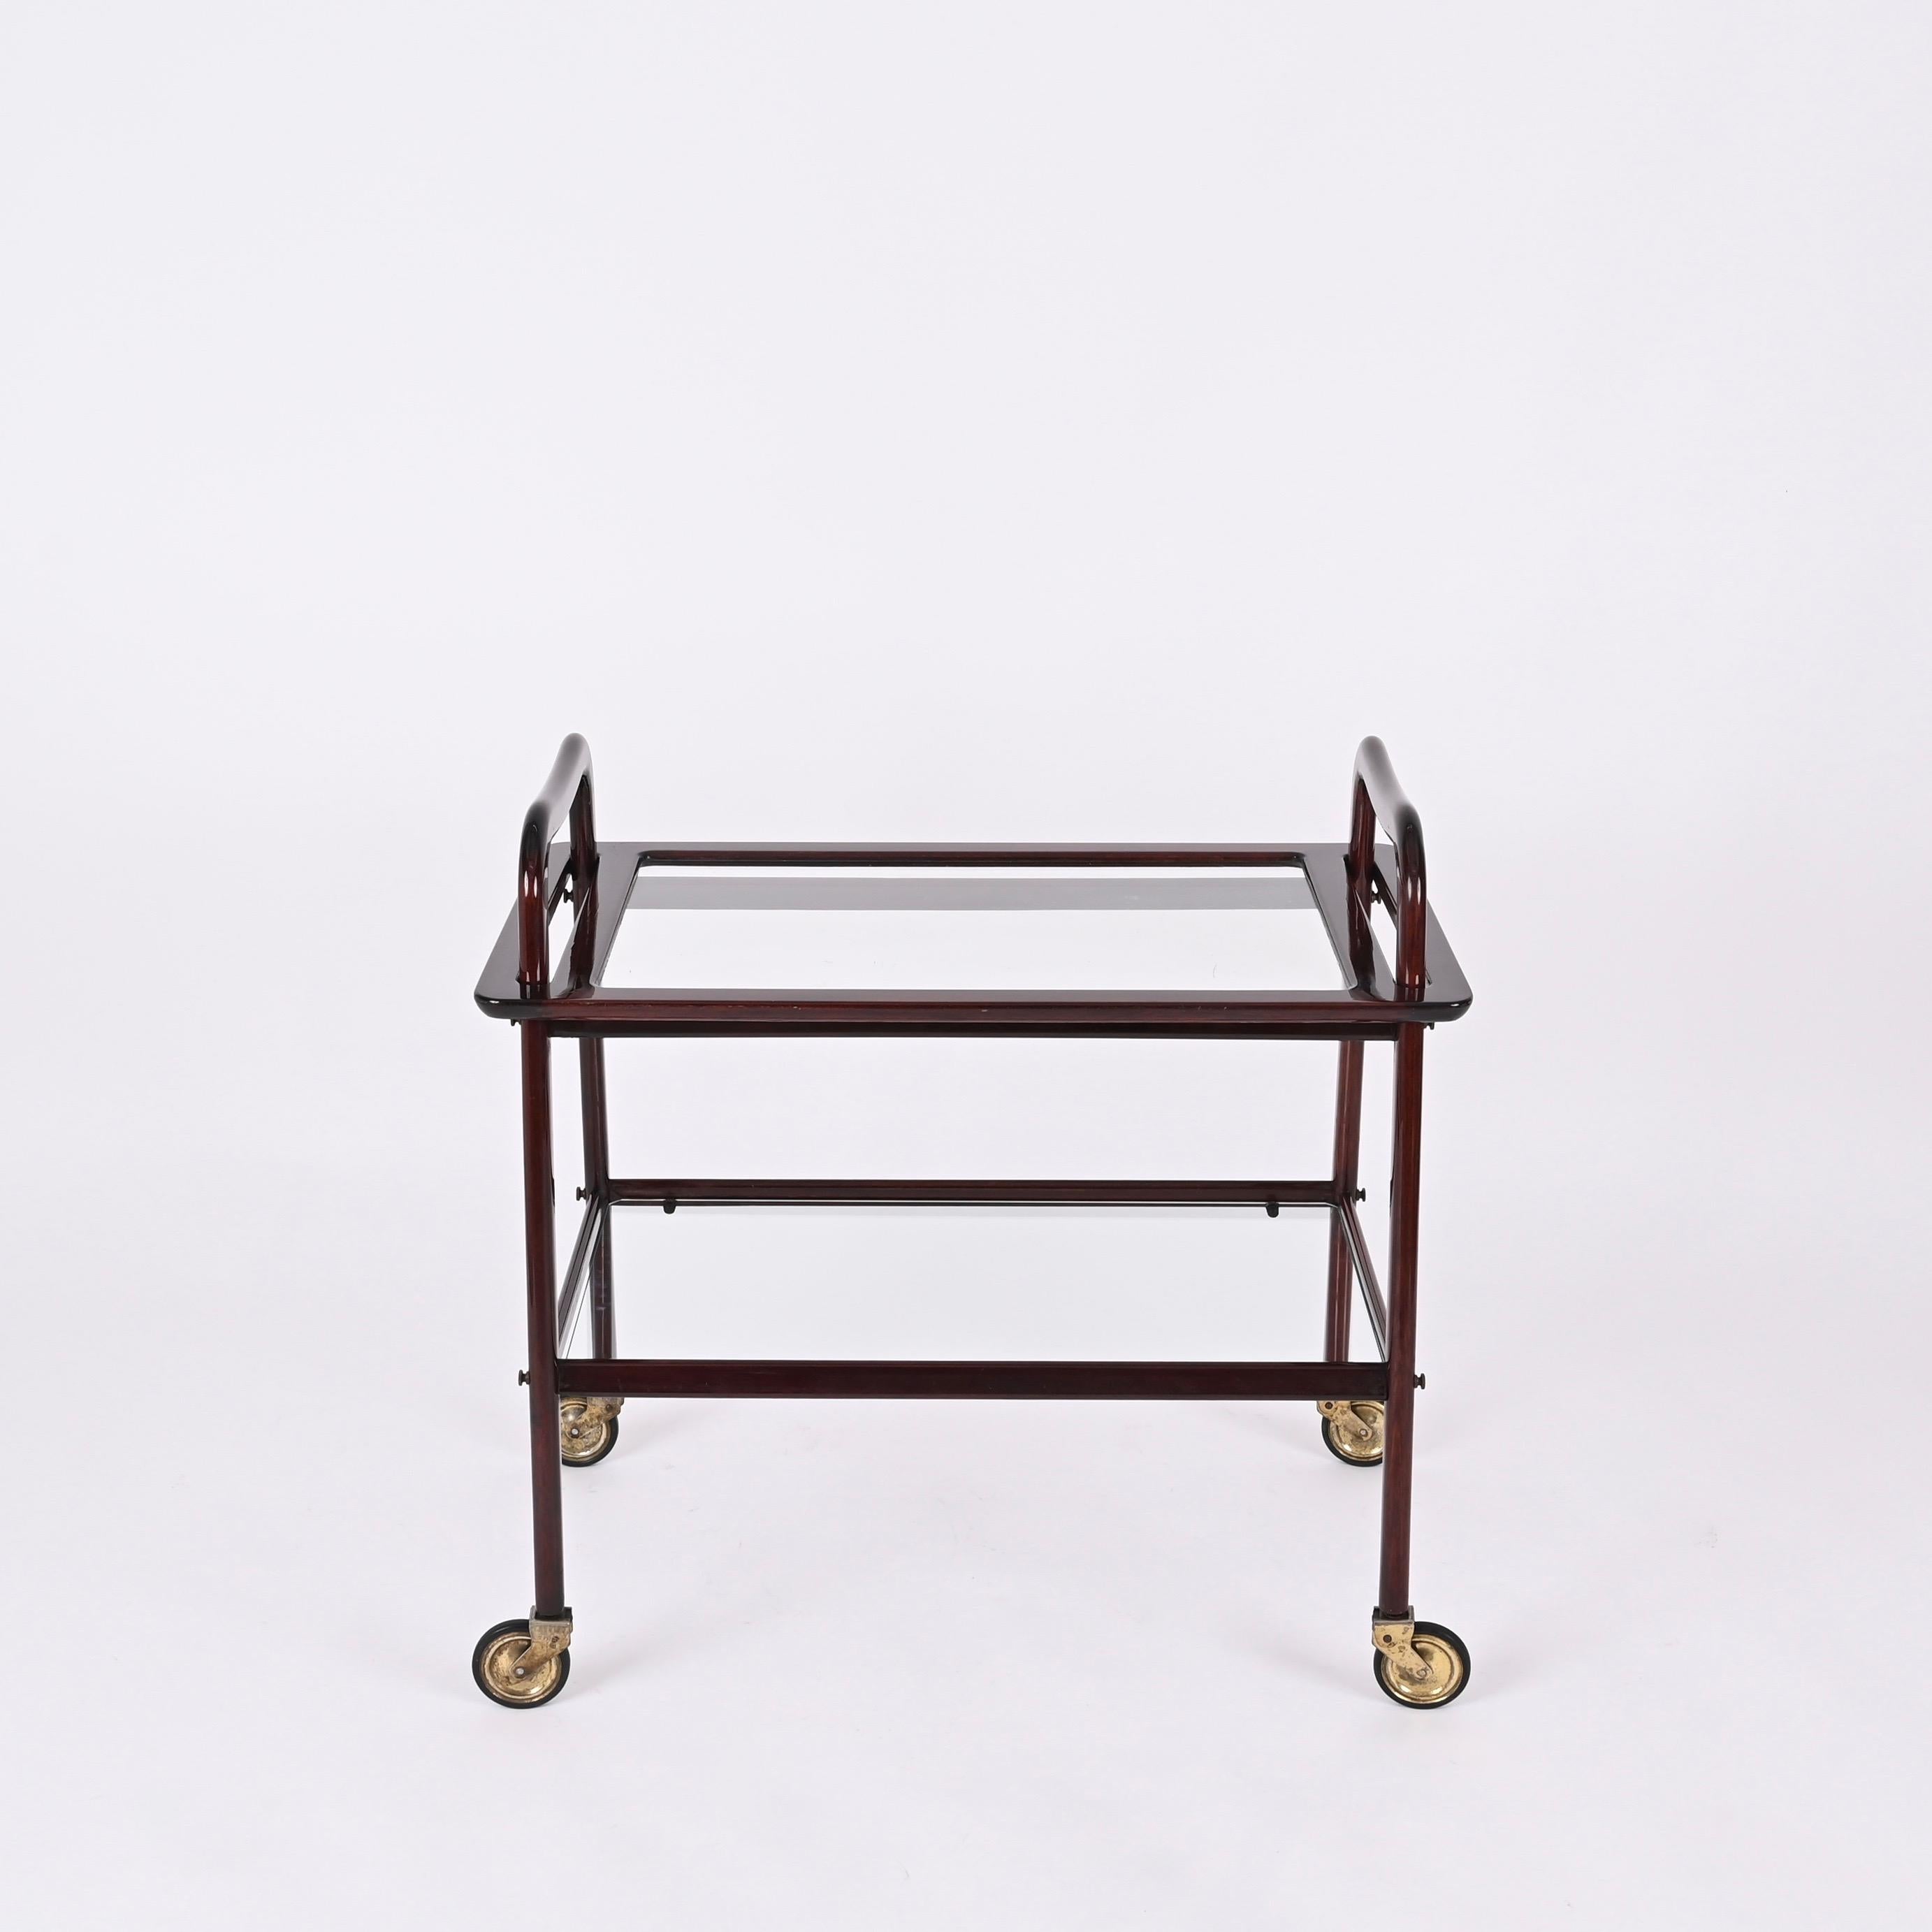 Mid-20th Century Mod. 201 Italian Serving Bar Cart by Ico Parisi for De Baggis, 1950s For Sale